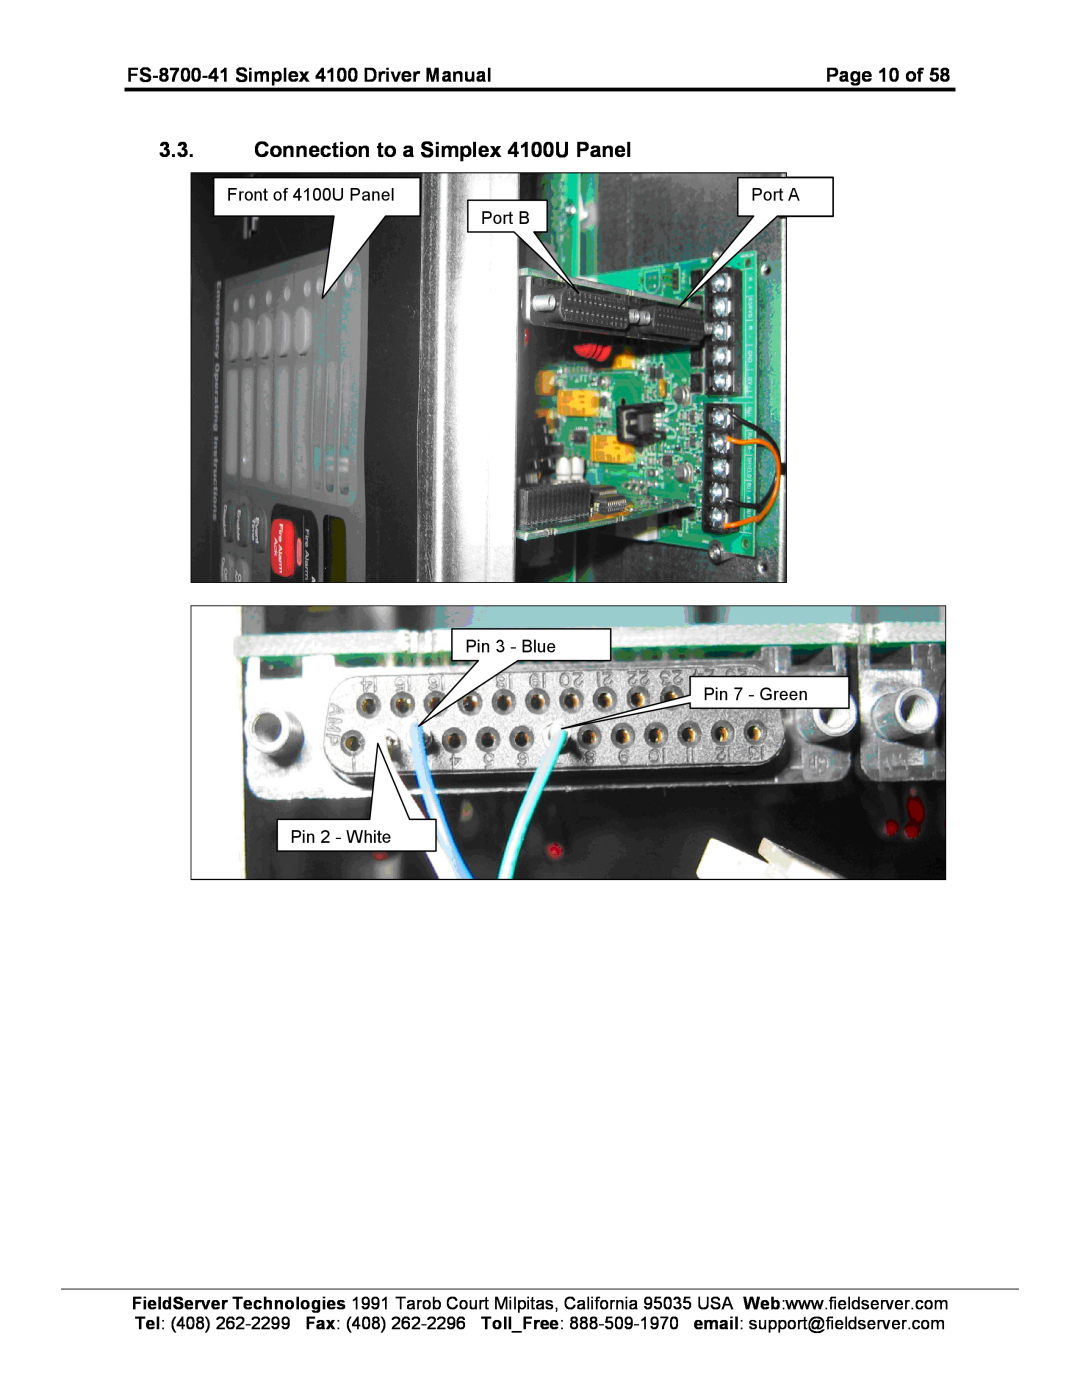 FieldServer instruction manual Connection to a Simplex 4100U Panel, FS-8700-41 Simplex 4100 Driver Manual, Page 10 of 